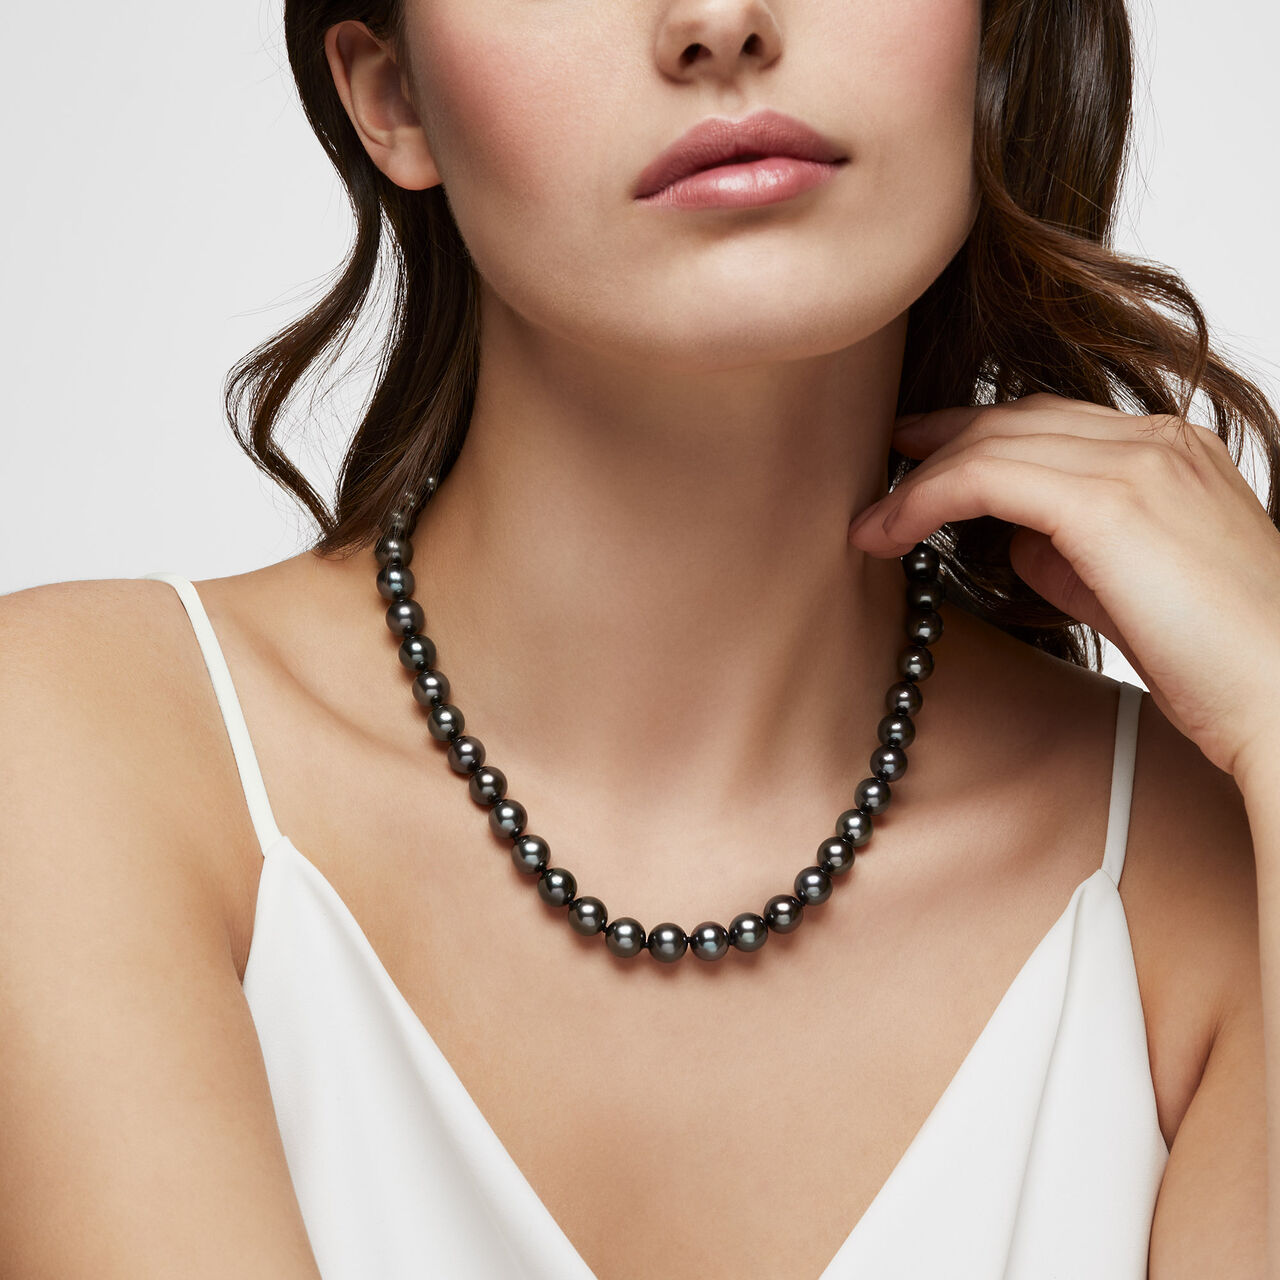 Diamond and White Gold Tahitian Pearl Necklace